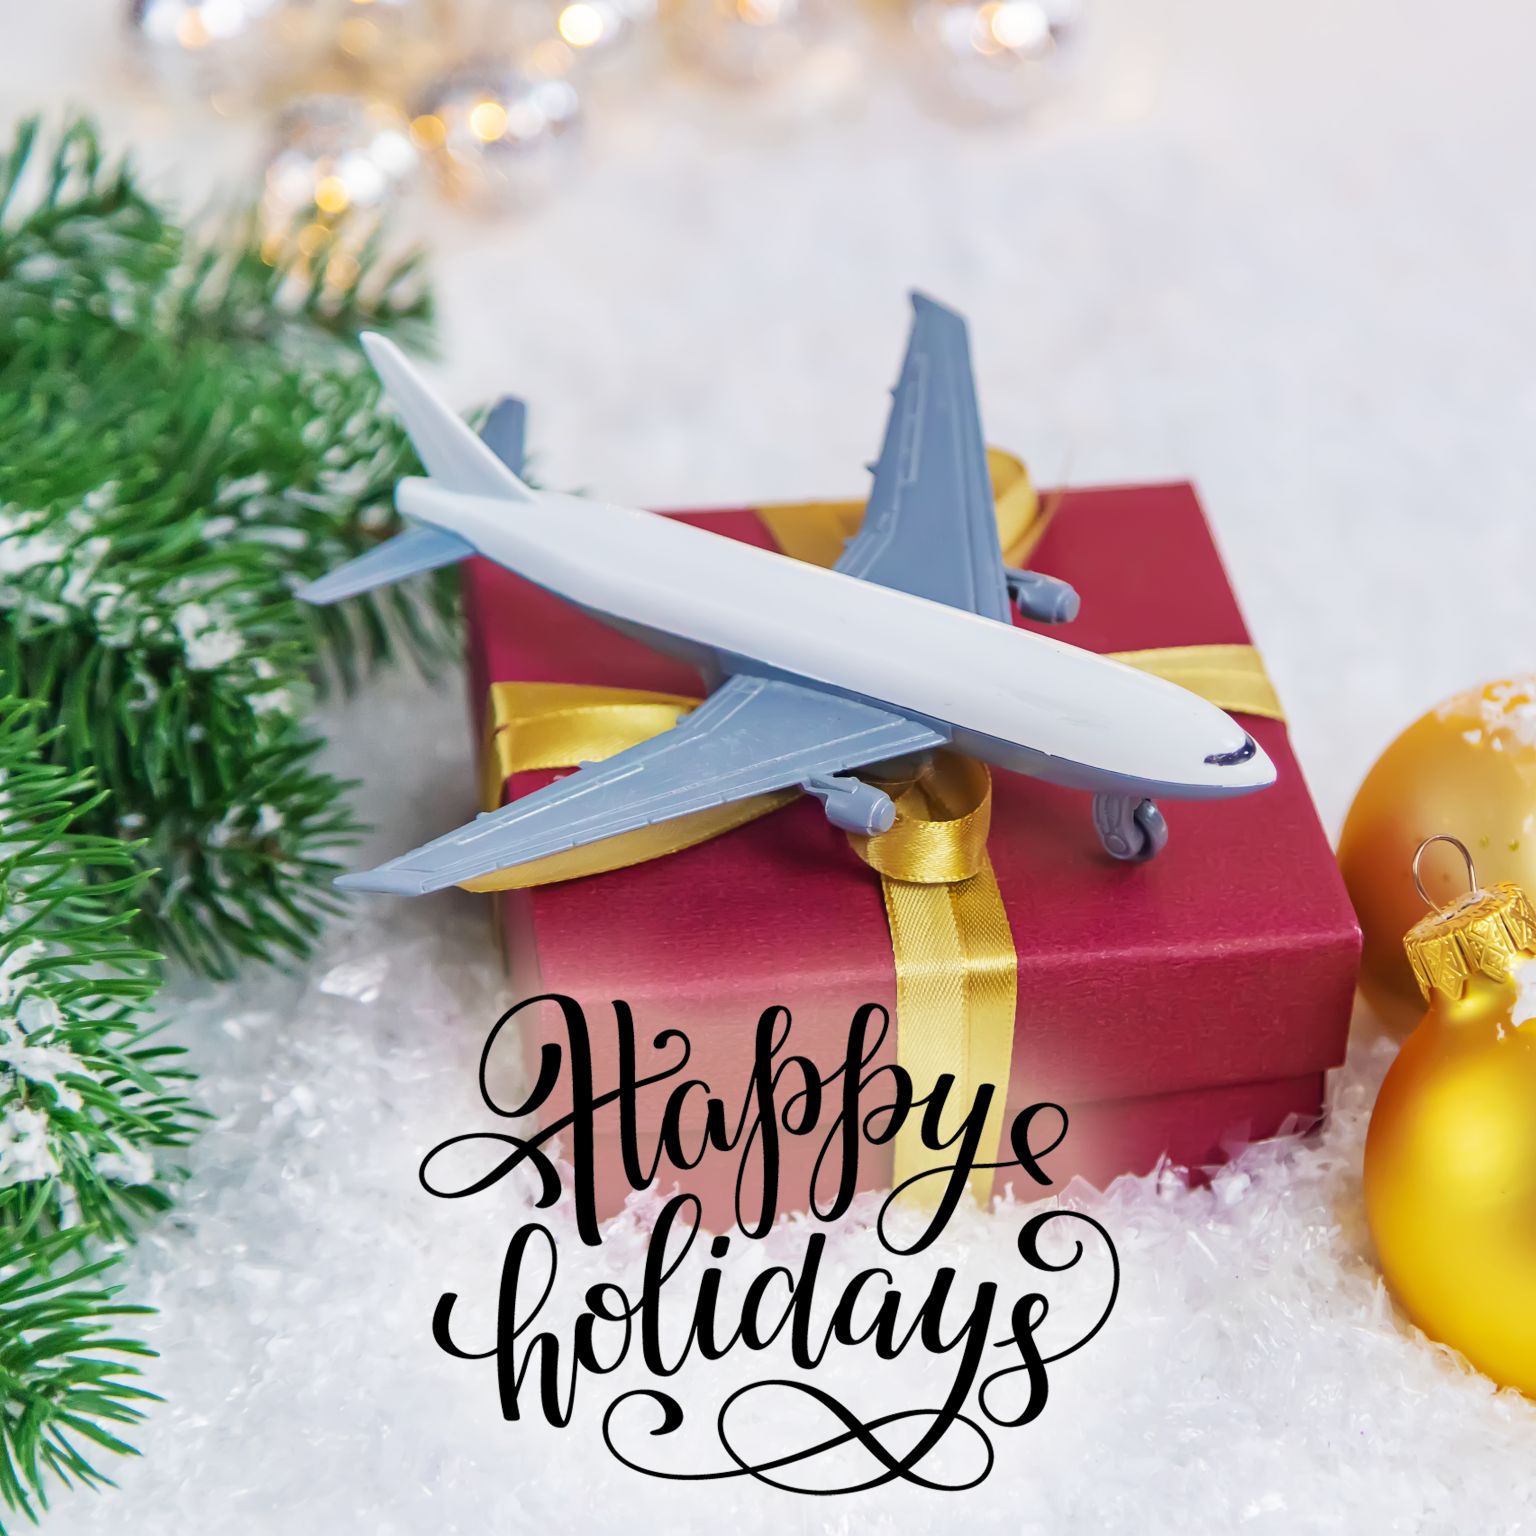 orkal, orkal industries' aircraft-grade toy plane atop a red box, with assembly solutions inspired ribbon, amidst aviation compliant christmas decor.